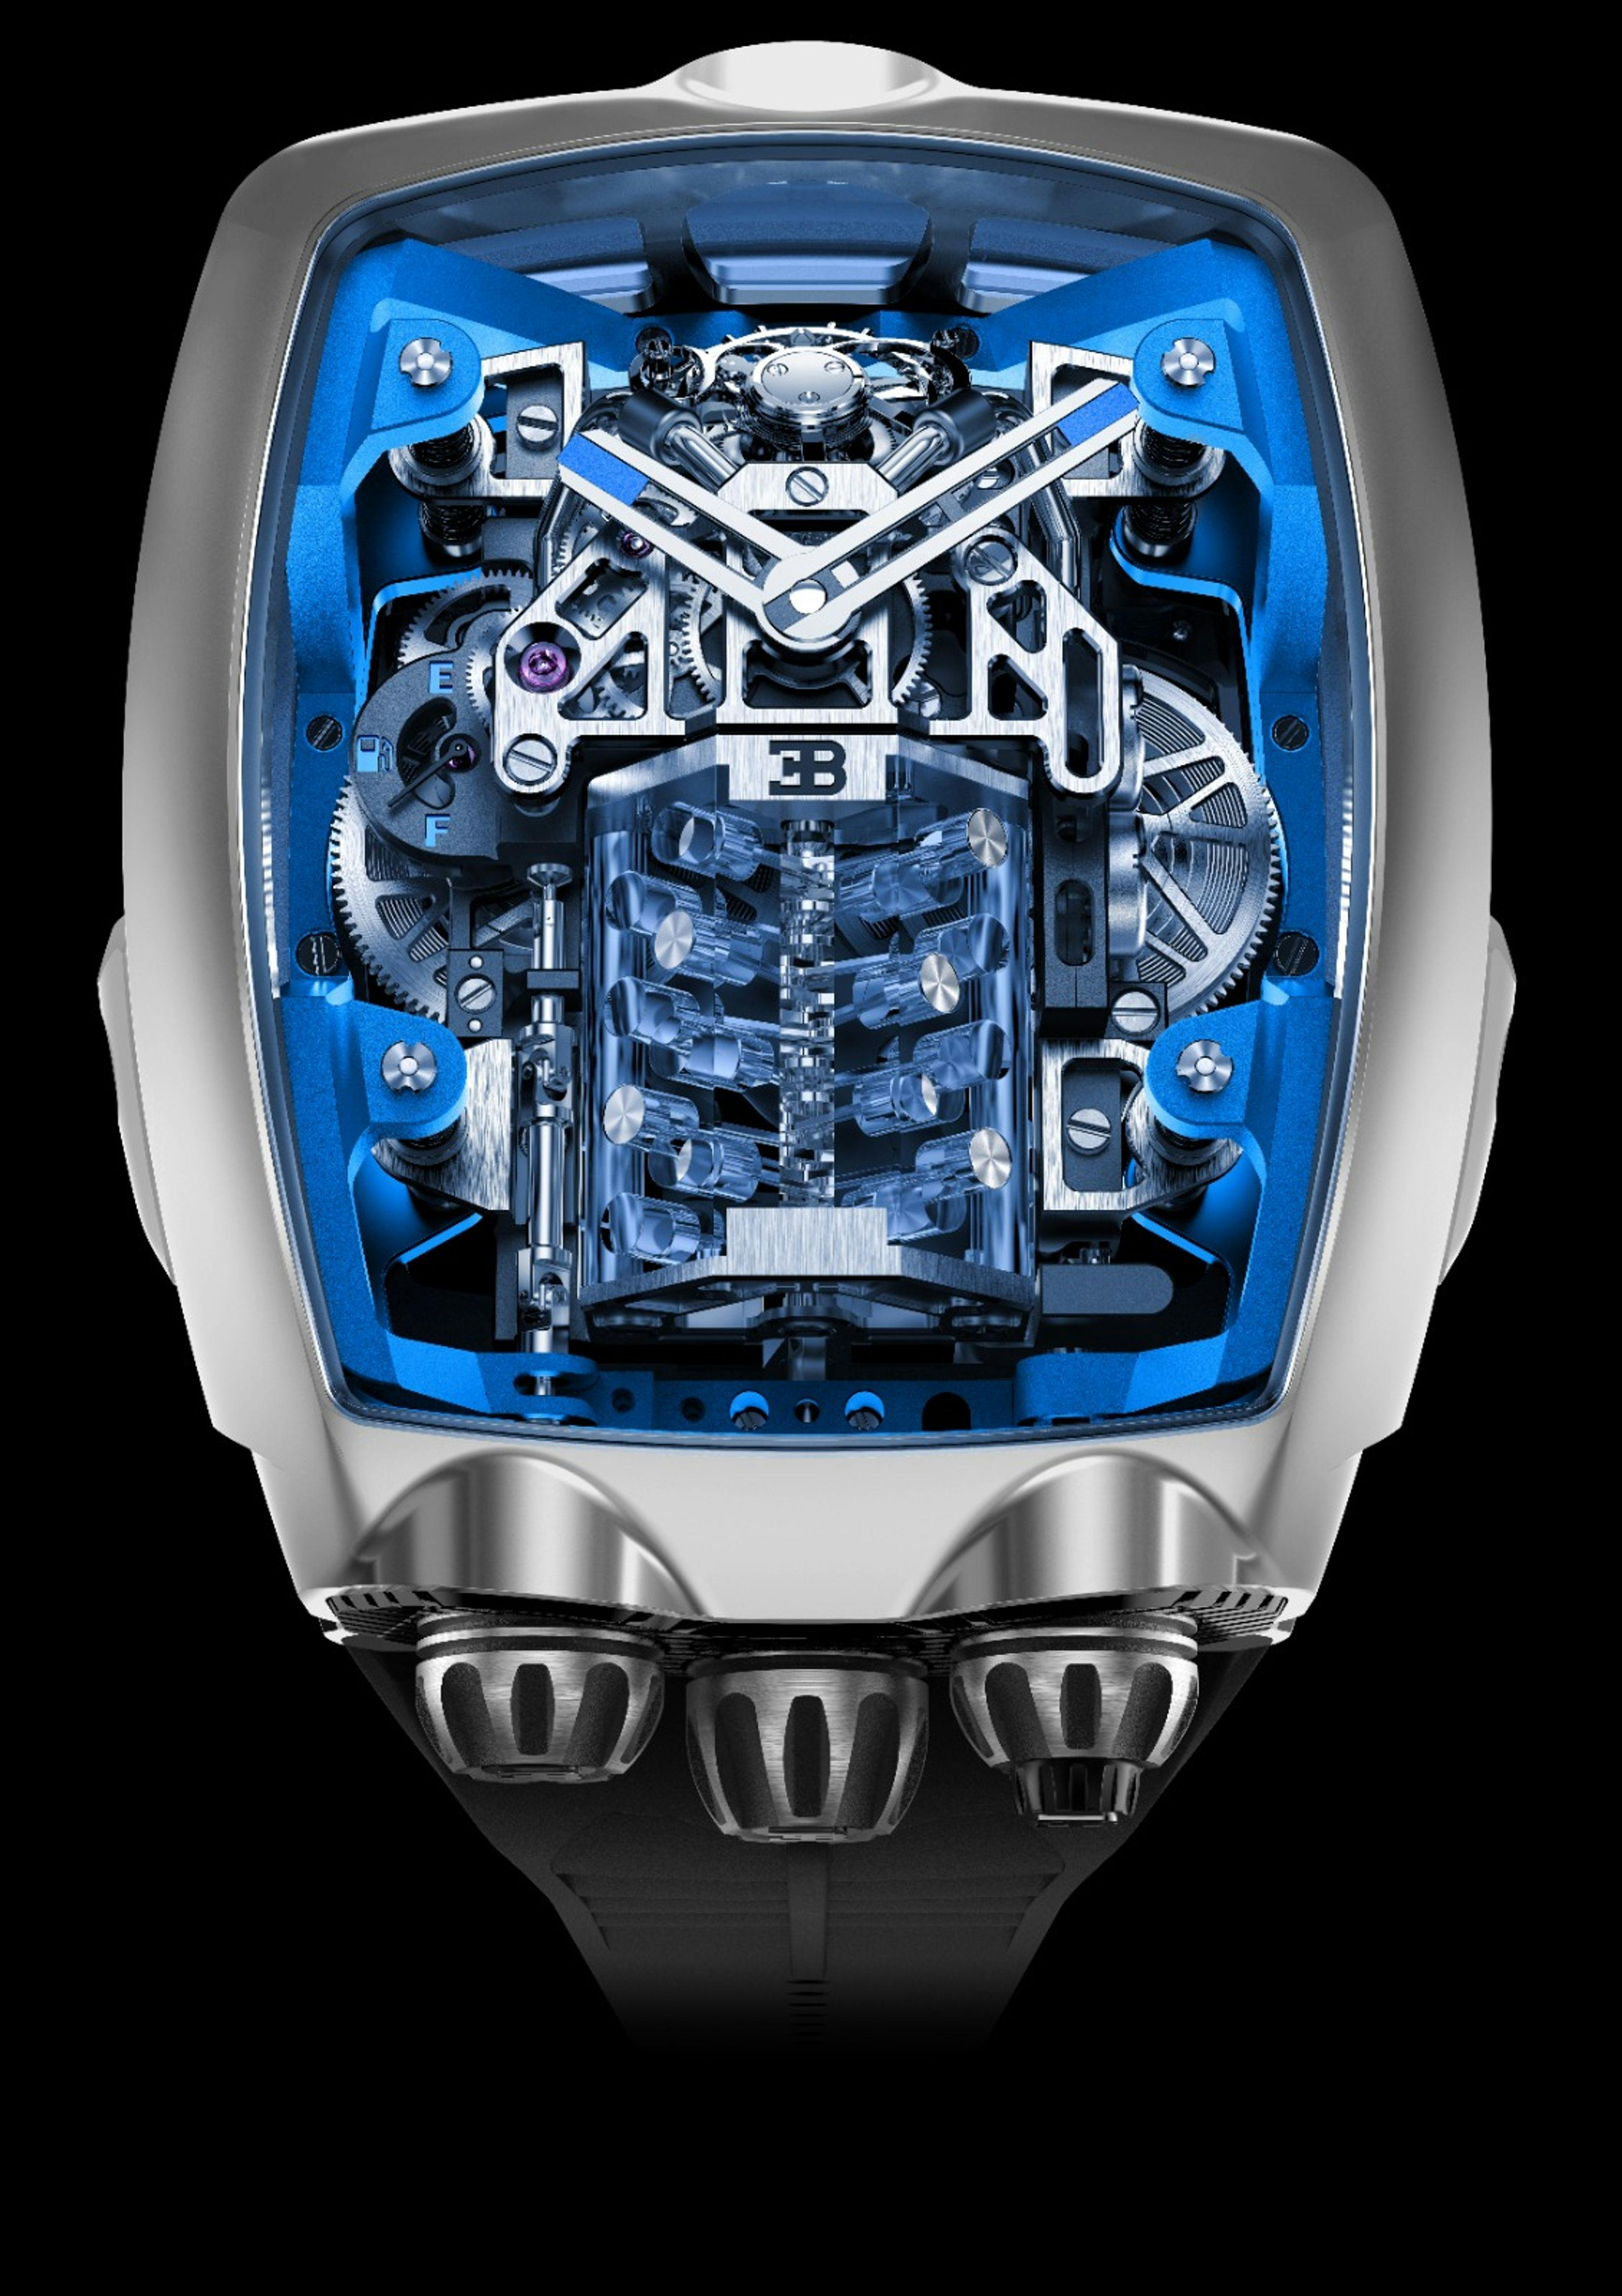 AN EXCLUSIVE TIMEPIECE WITH ITS OWN TINY W16 ENGINE